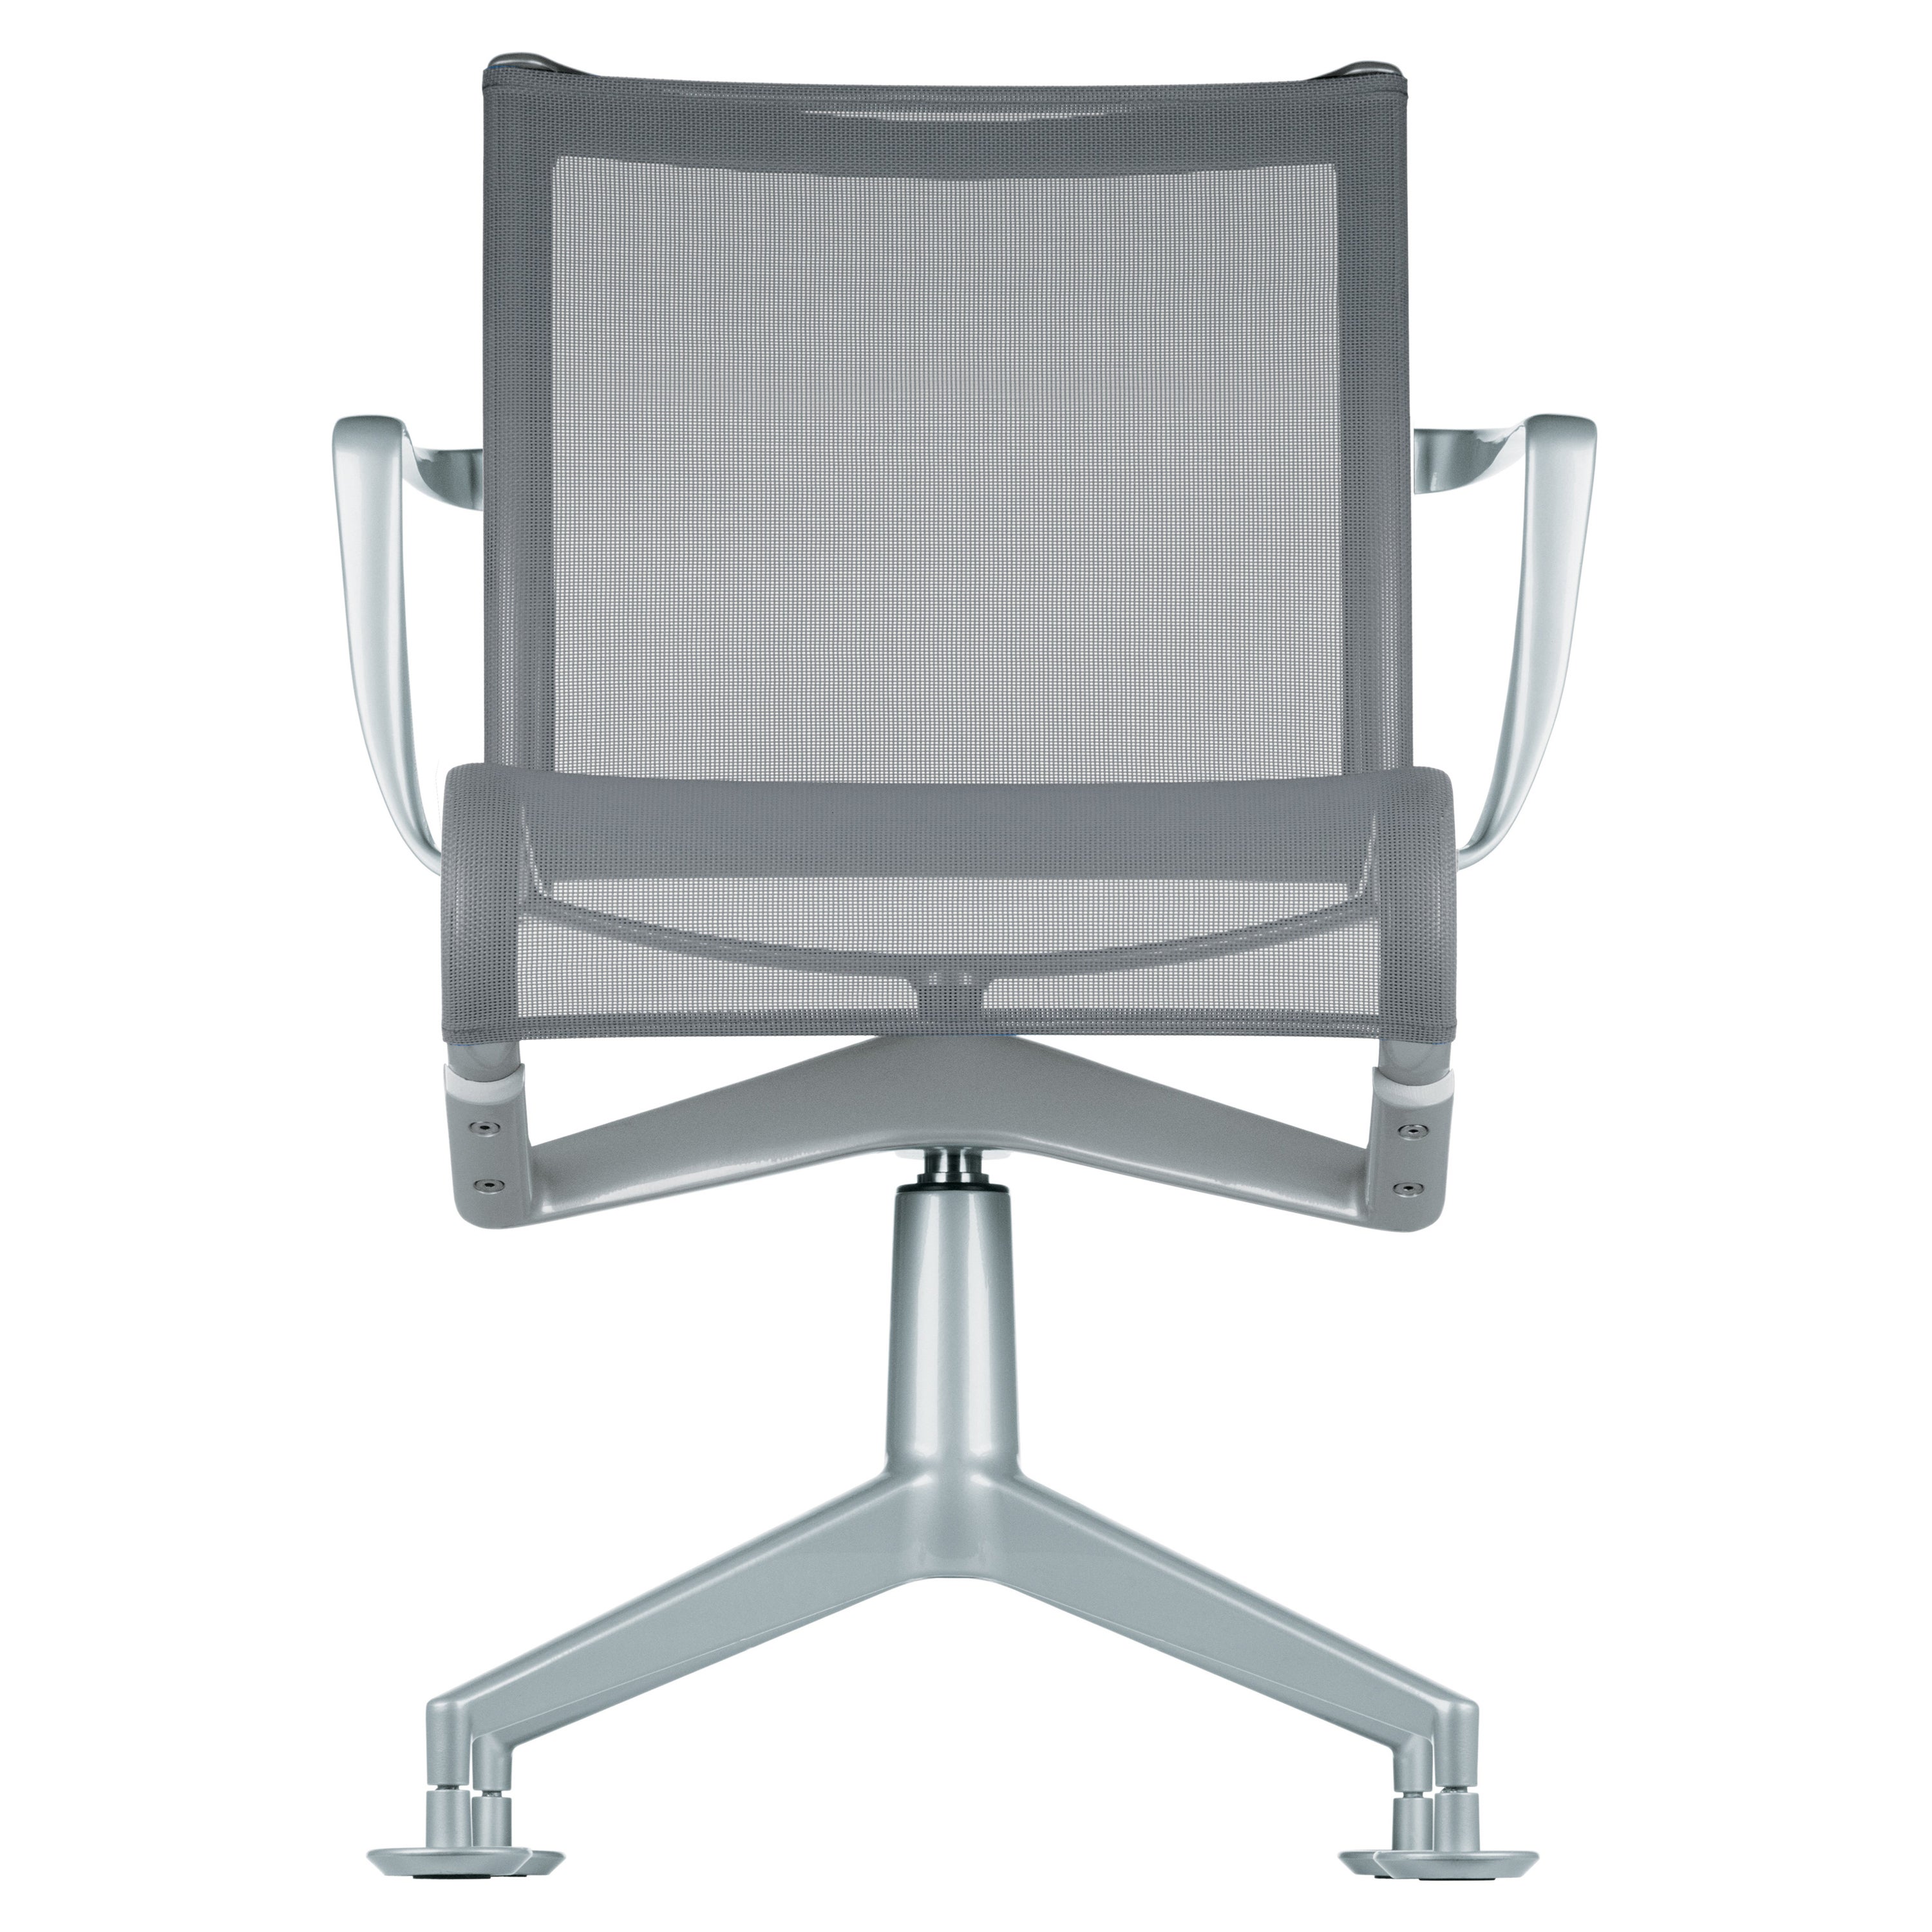 Alias 447 Meetingframe+ Tilt 47 Chair in Grey Mesh with Lacquered Aluminum Frame For Sale